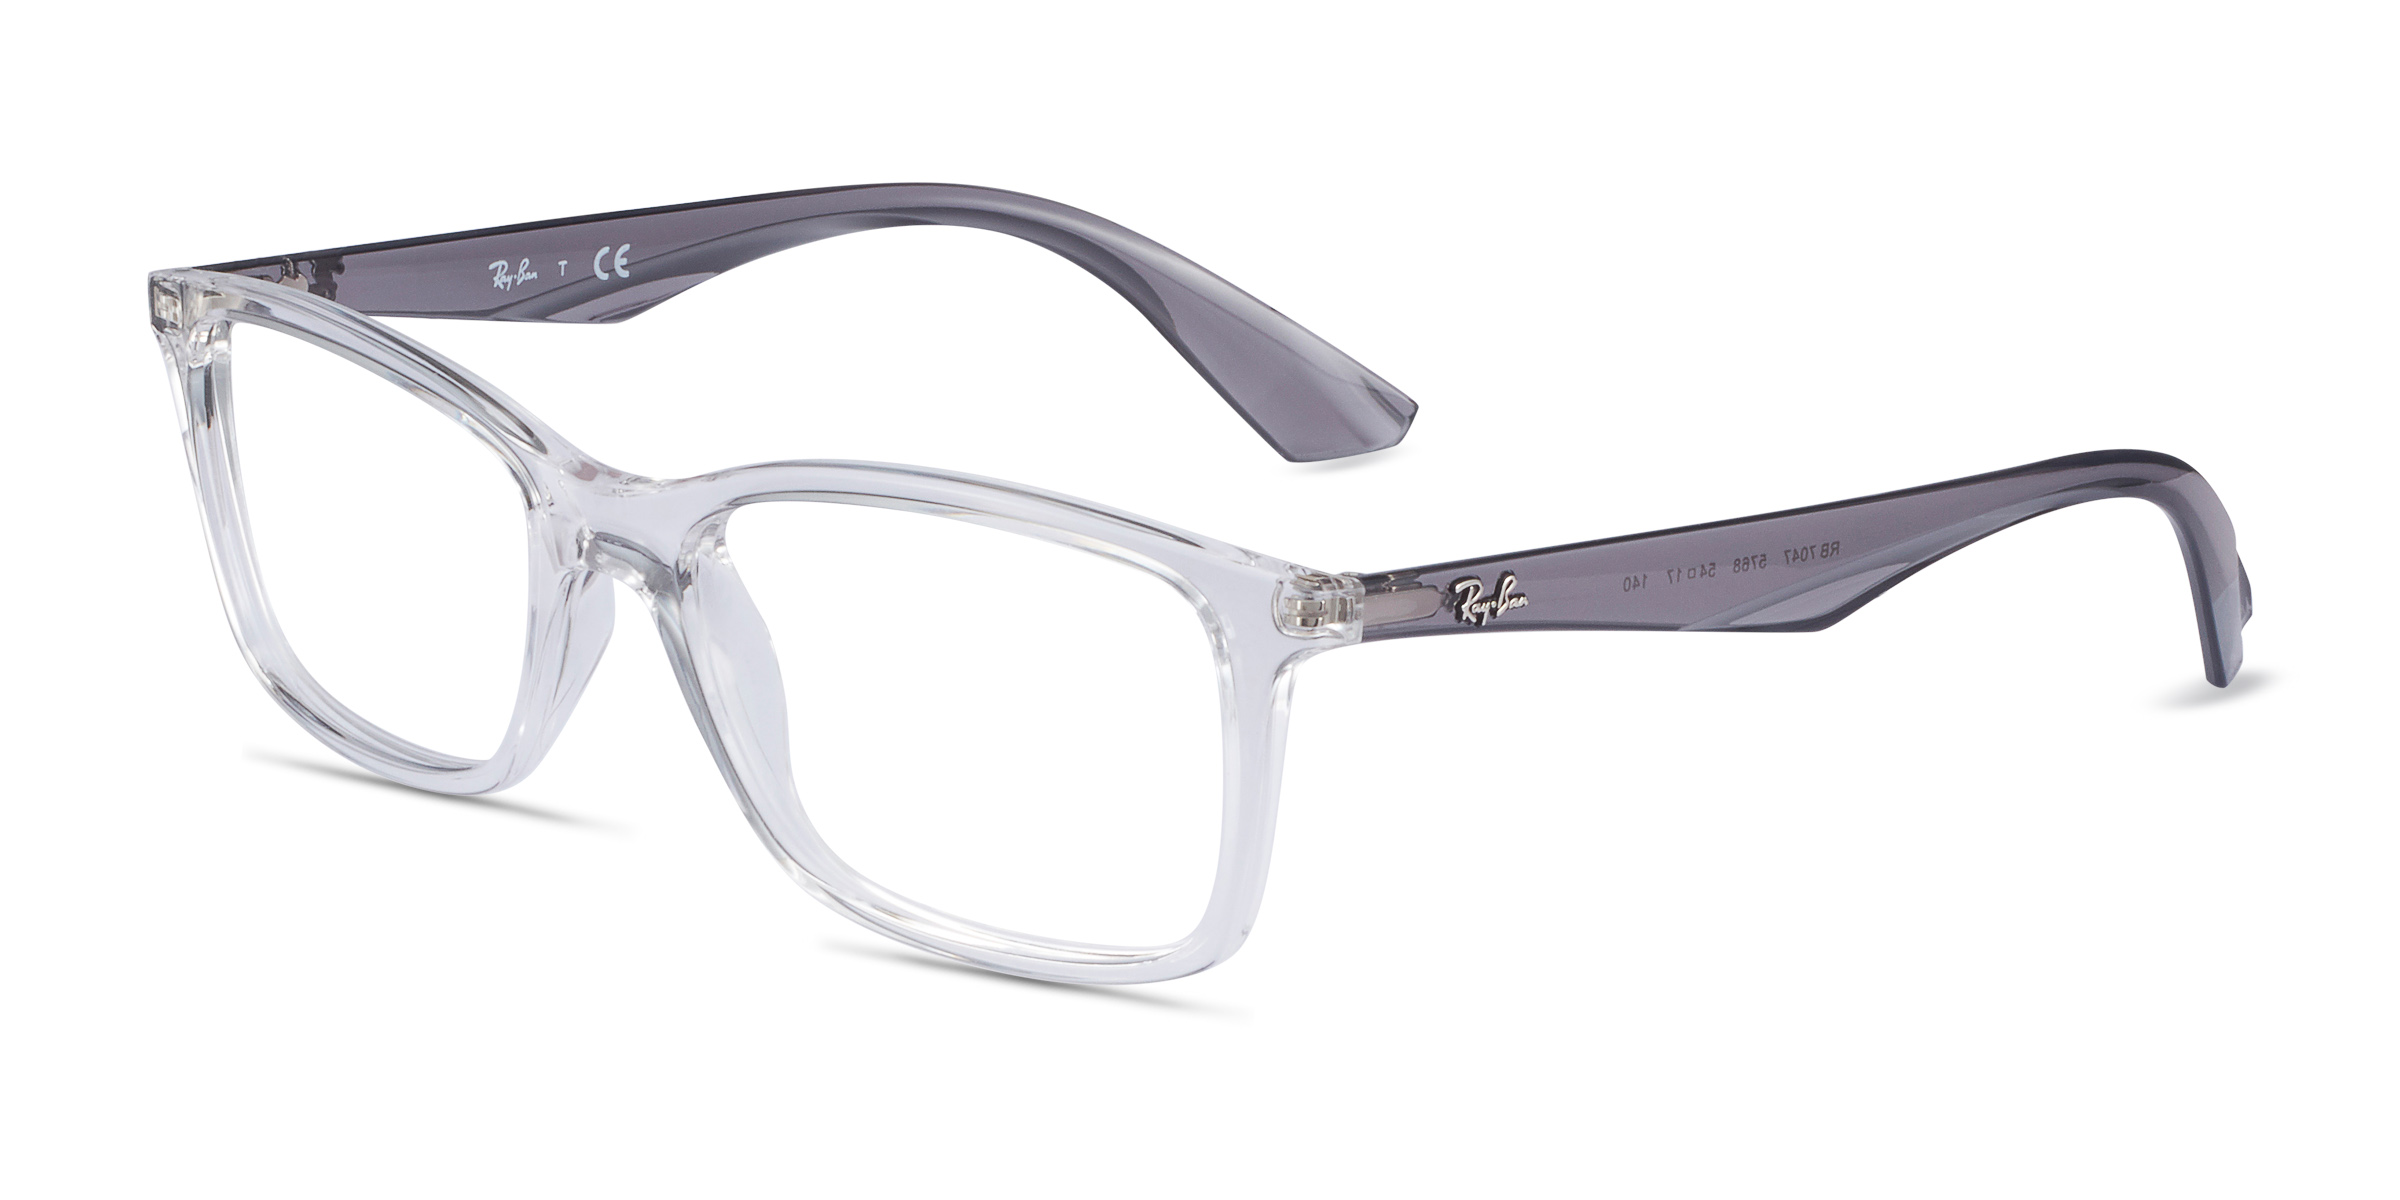 Ray Ban Rb7047 Rectangle Clear And Gray Frame Eyeglasses Eyebuydirect